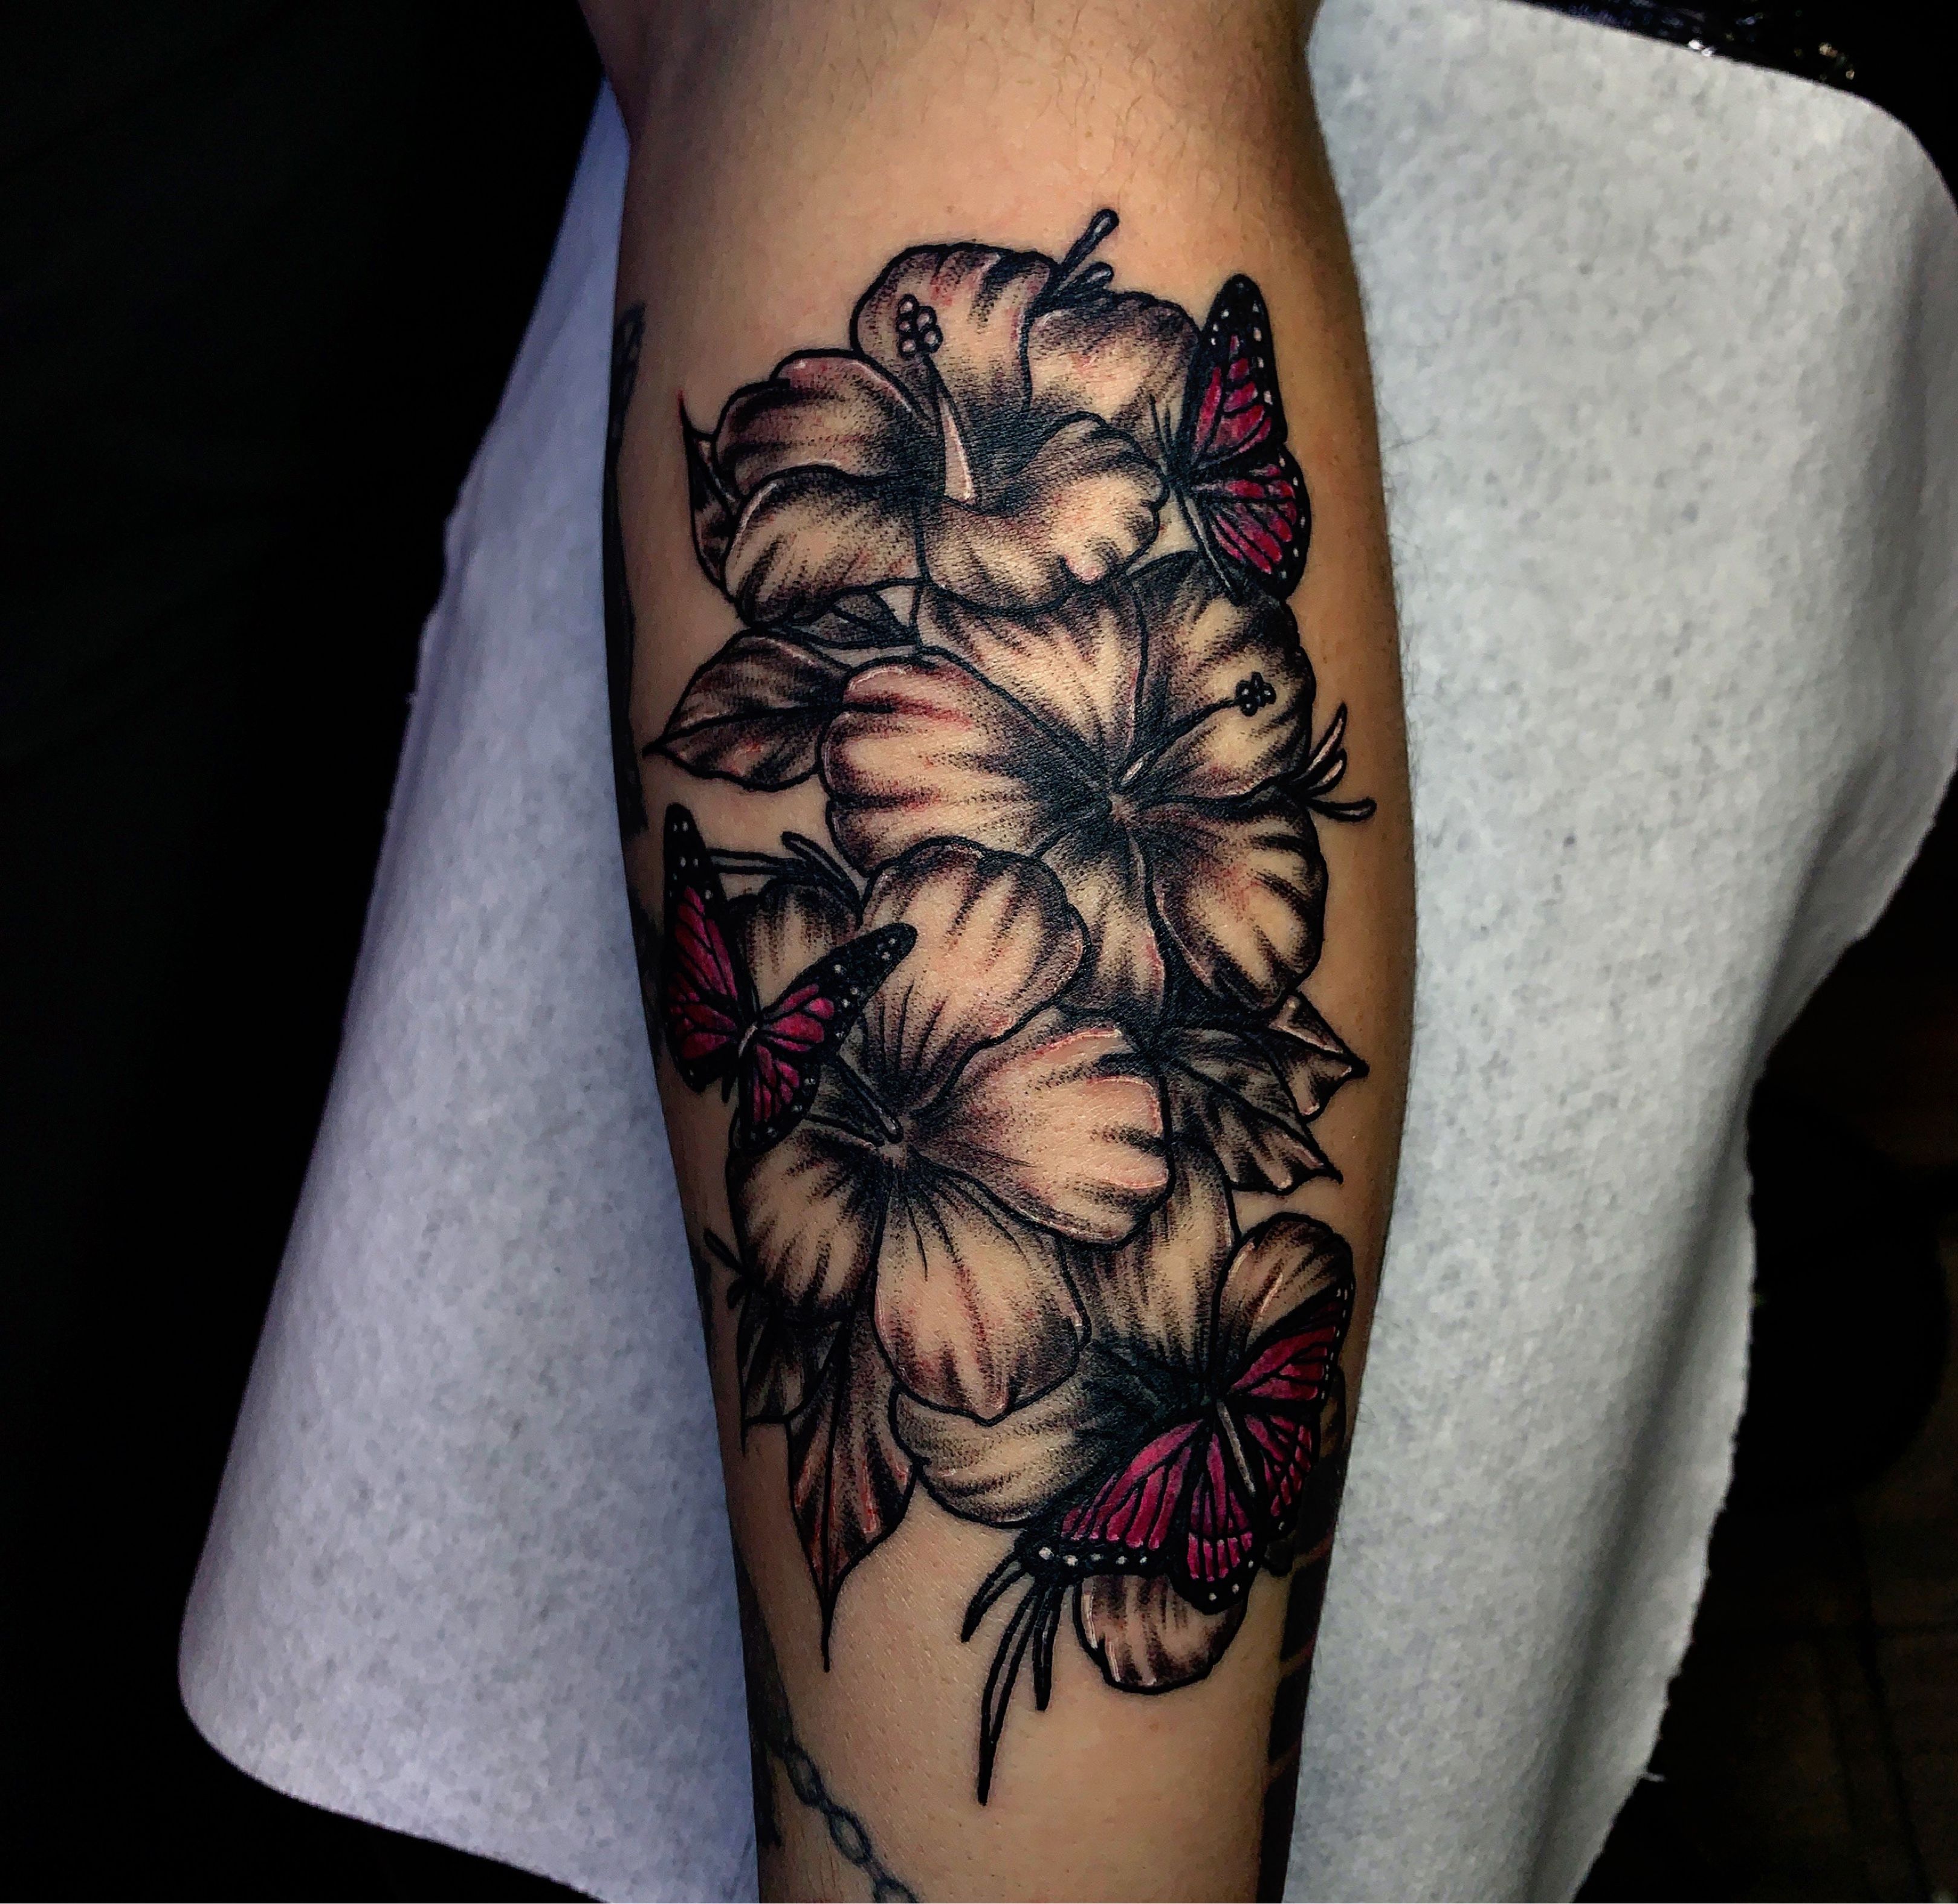 20 Best Hibiscus Tattoo Designs to Inspire You | Hibiscus tattoo, Tropical flower  tattoos, Shoulder tattoos for women